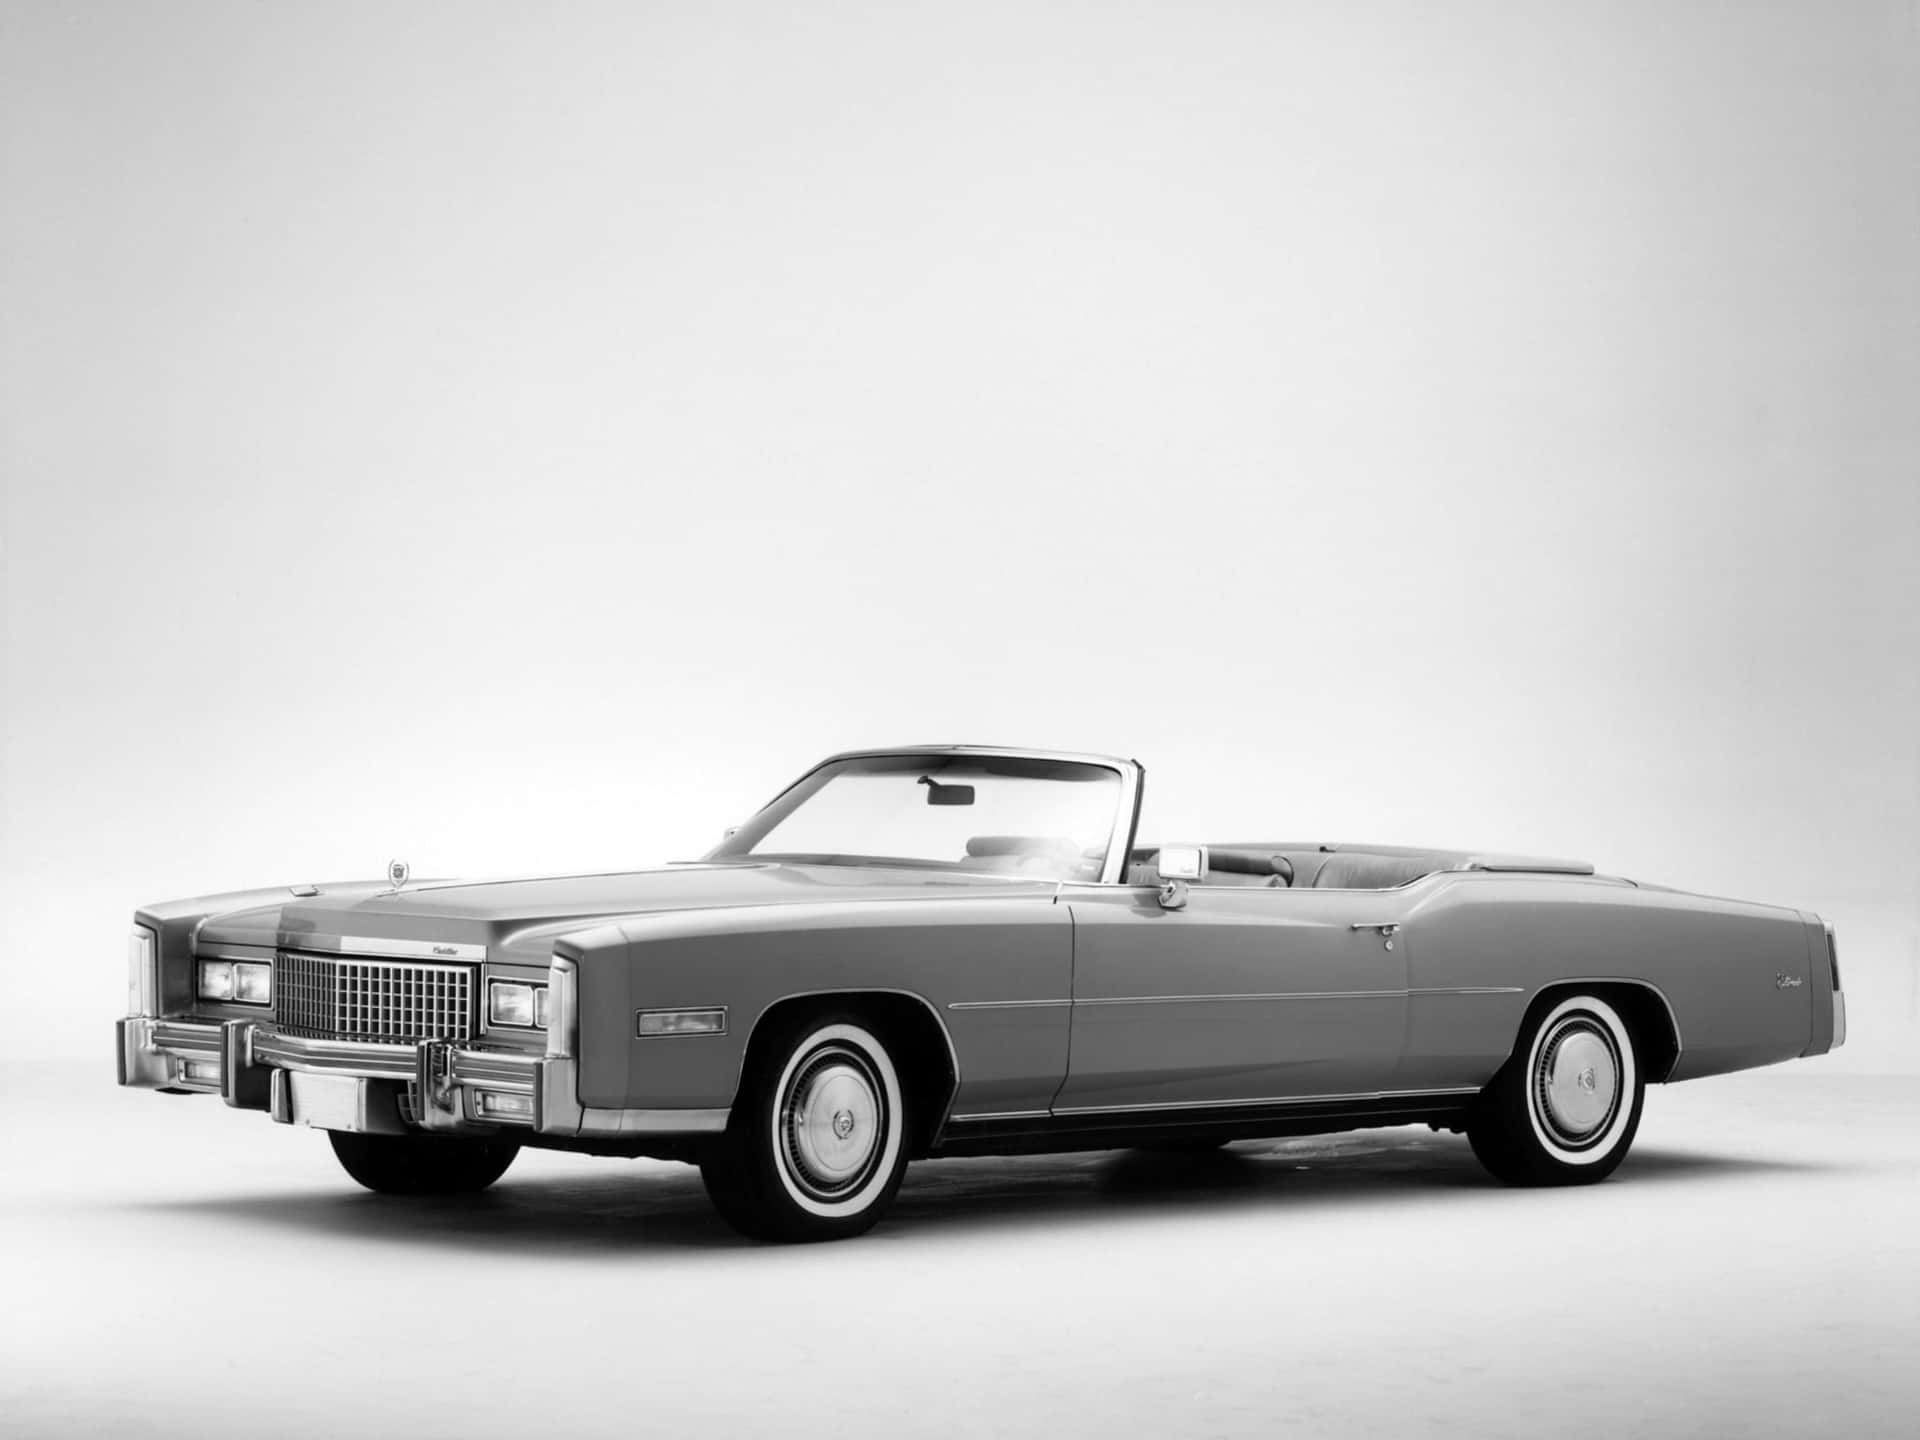 Vintage Cadillac Fleetwood in all its glory Wallpaper